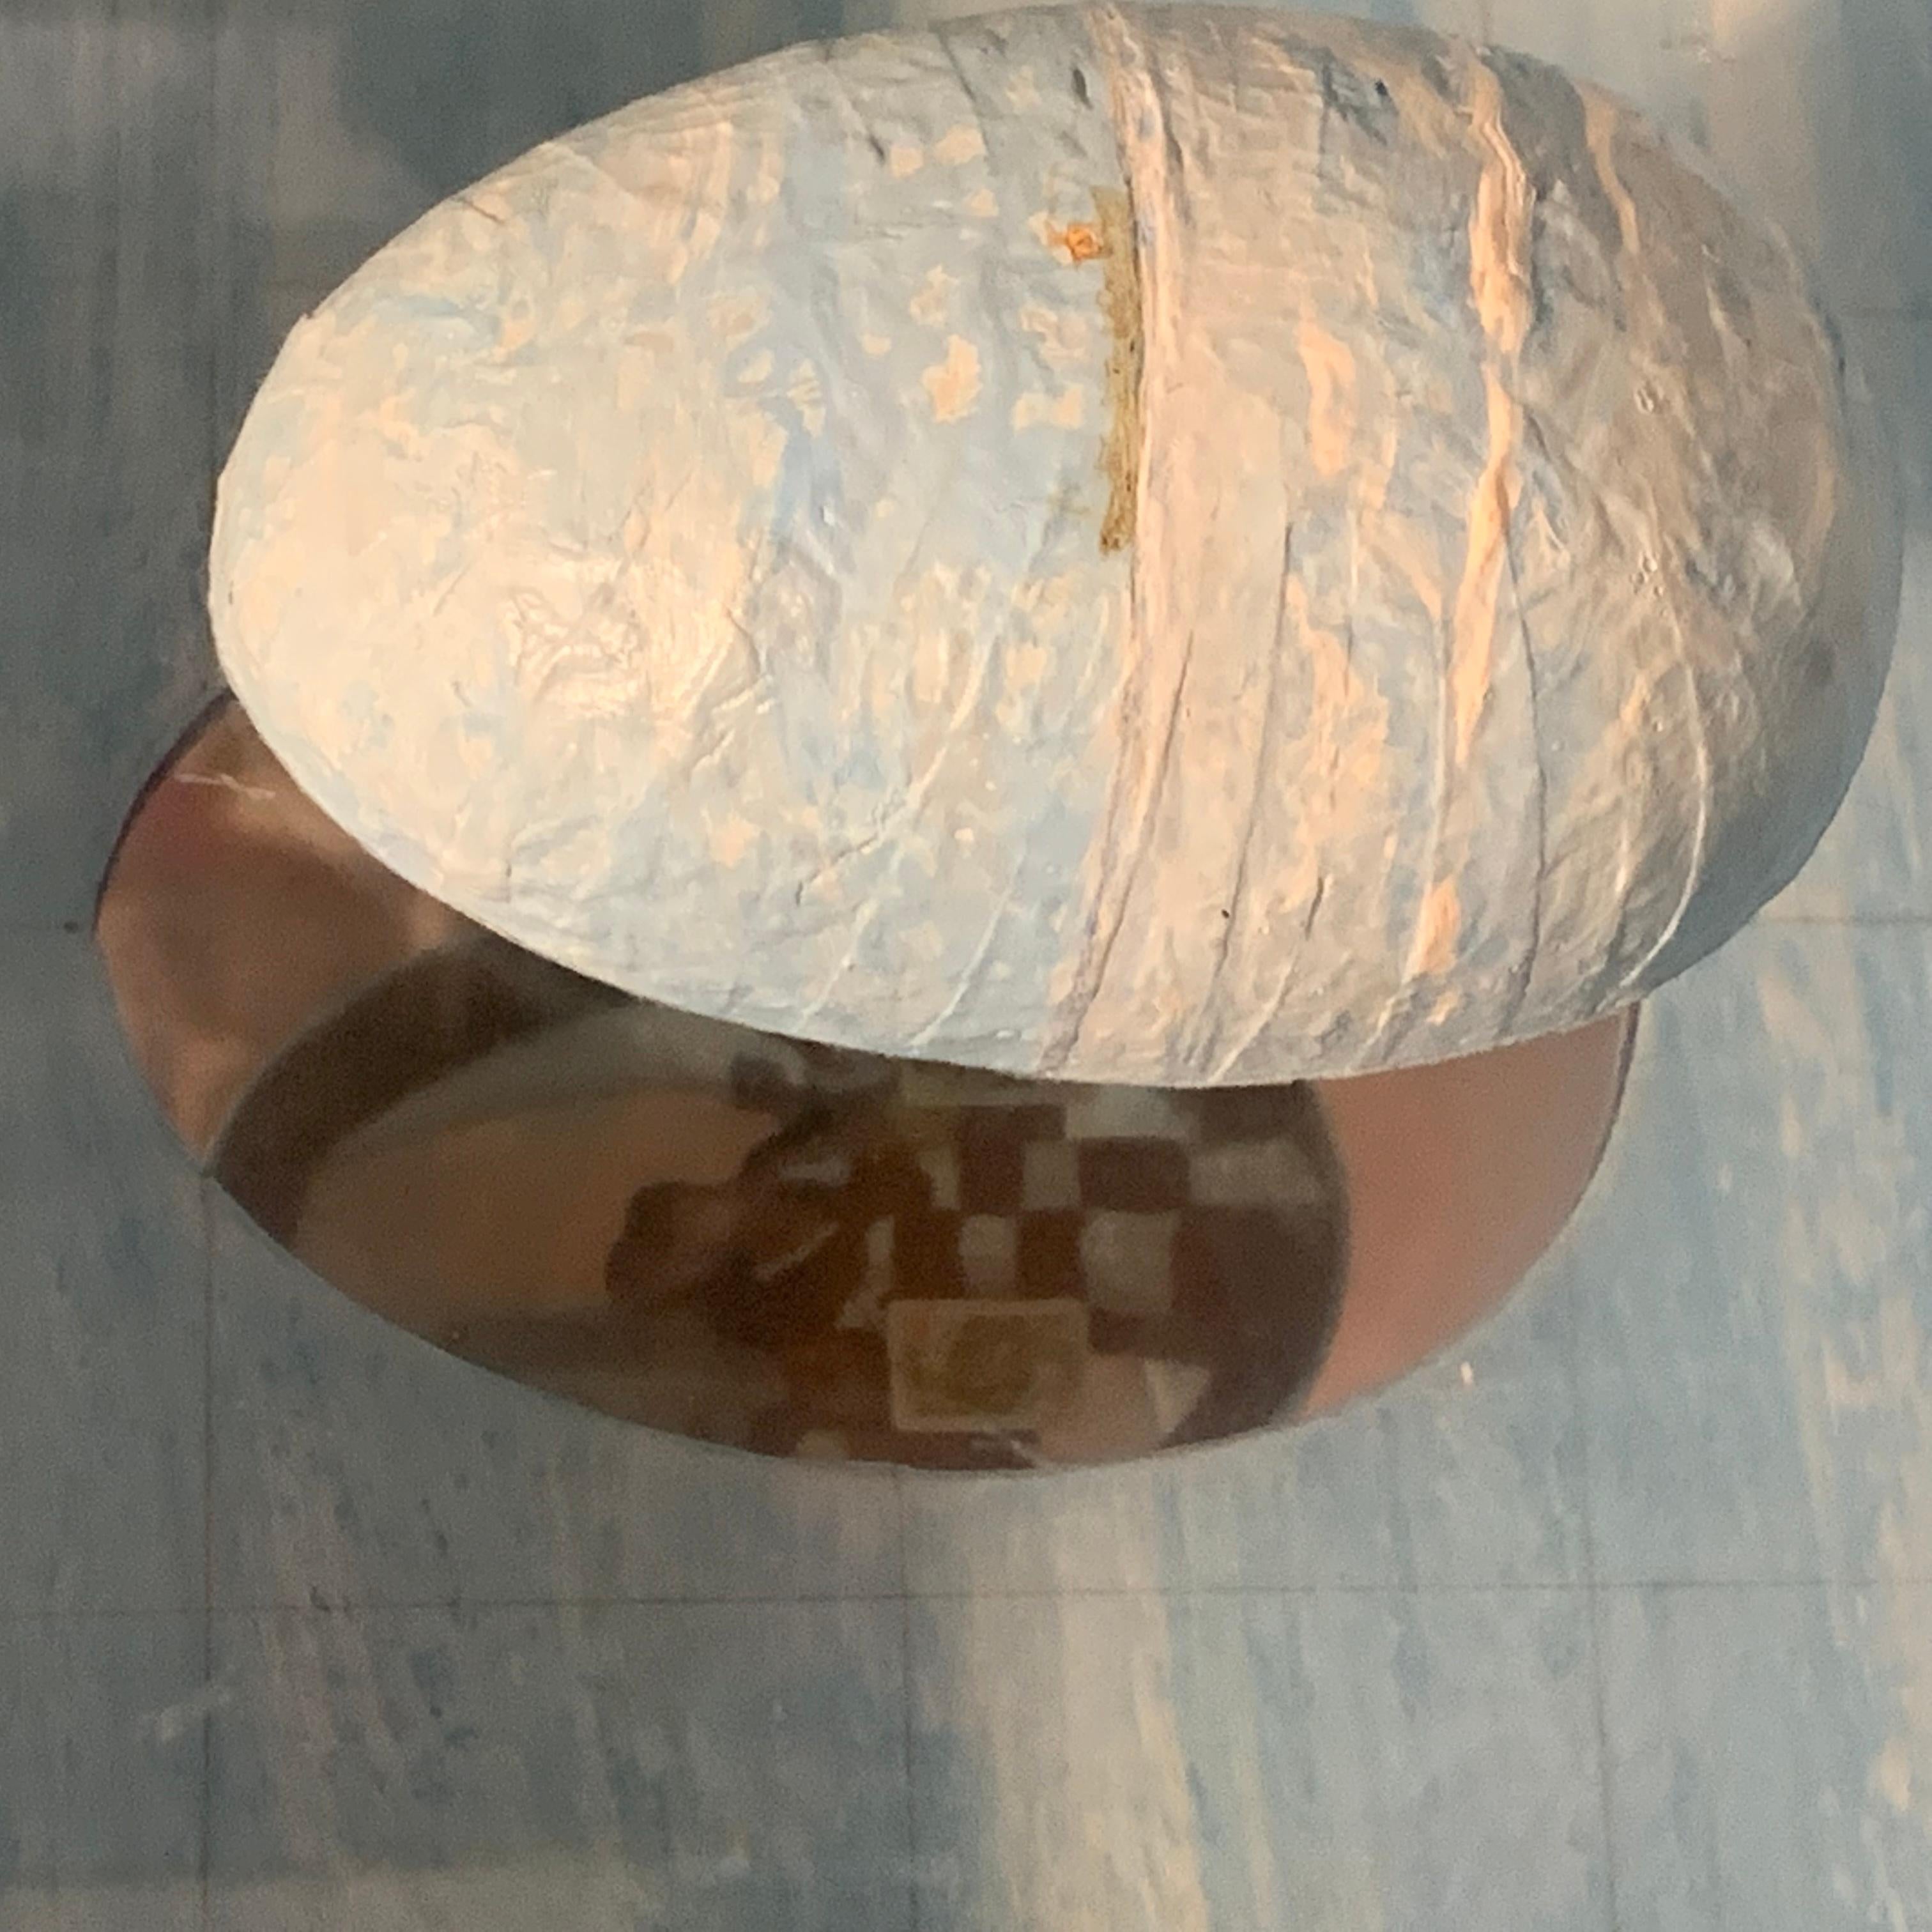 Mixed media assemblage titled Fata Morgana II. Attributed to artist Gordon Wagner. Unsigned. 

The image of a robed plastic figure is contained within the half egg- shaped dome; the figure is wearing a checkered black and white robe and is reflected